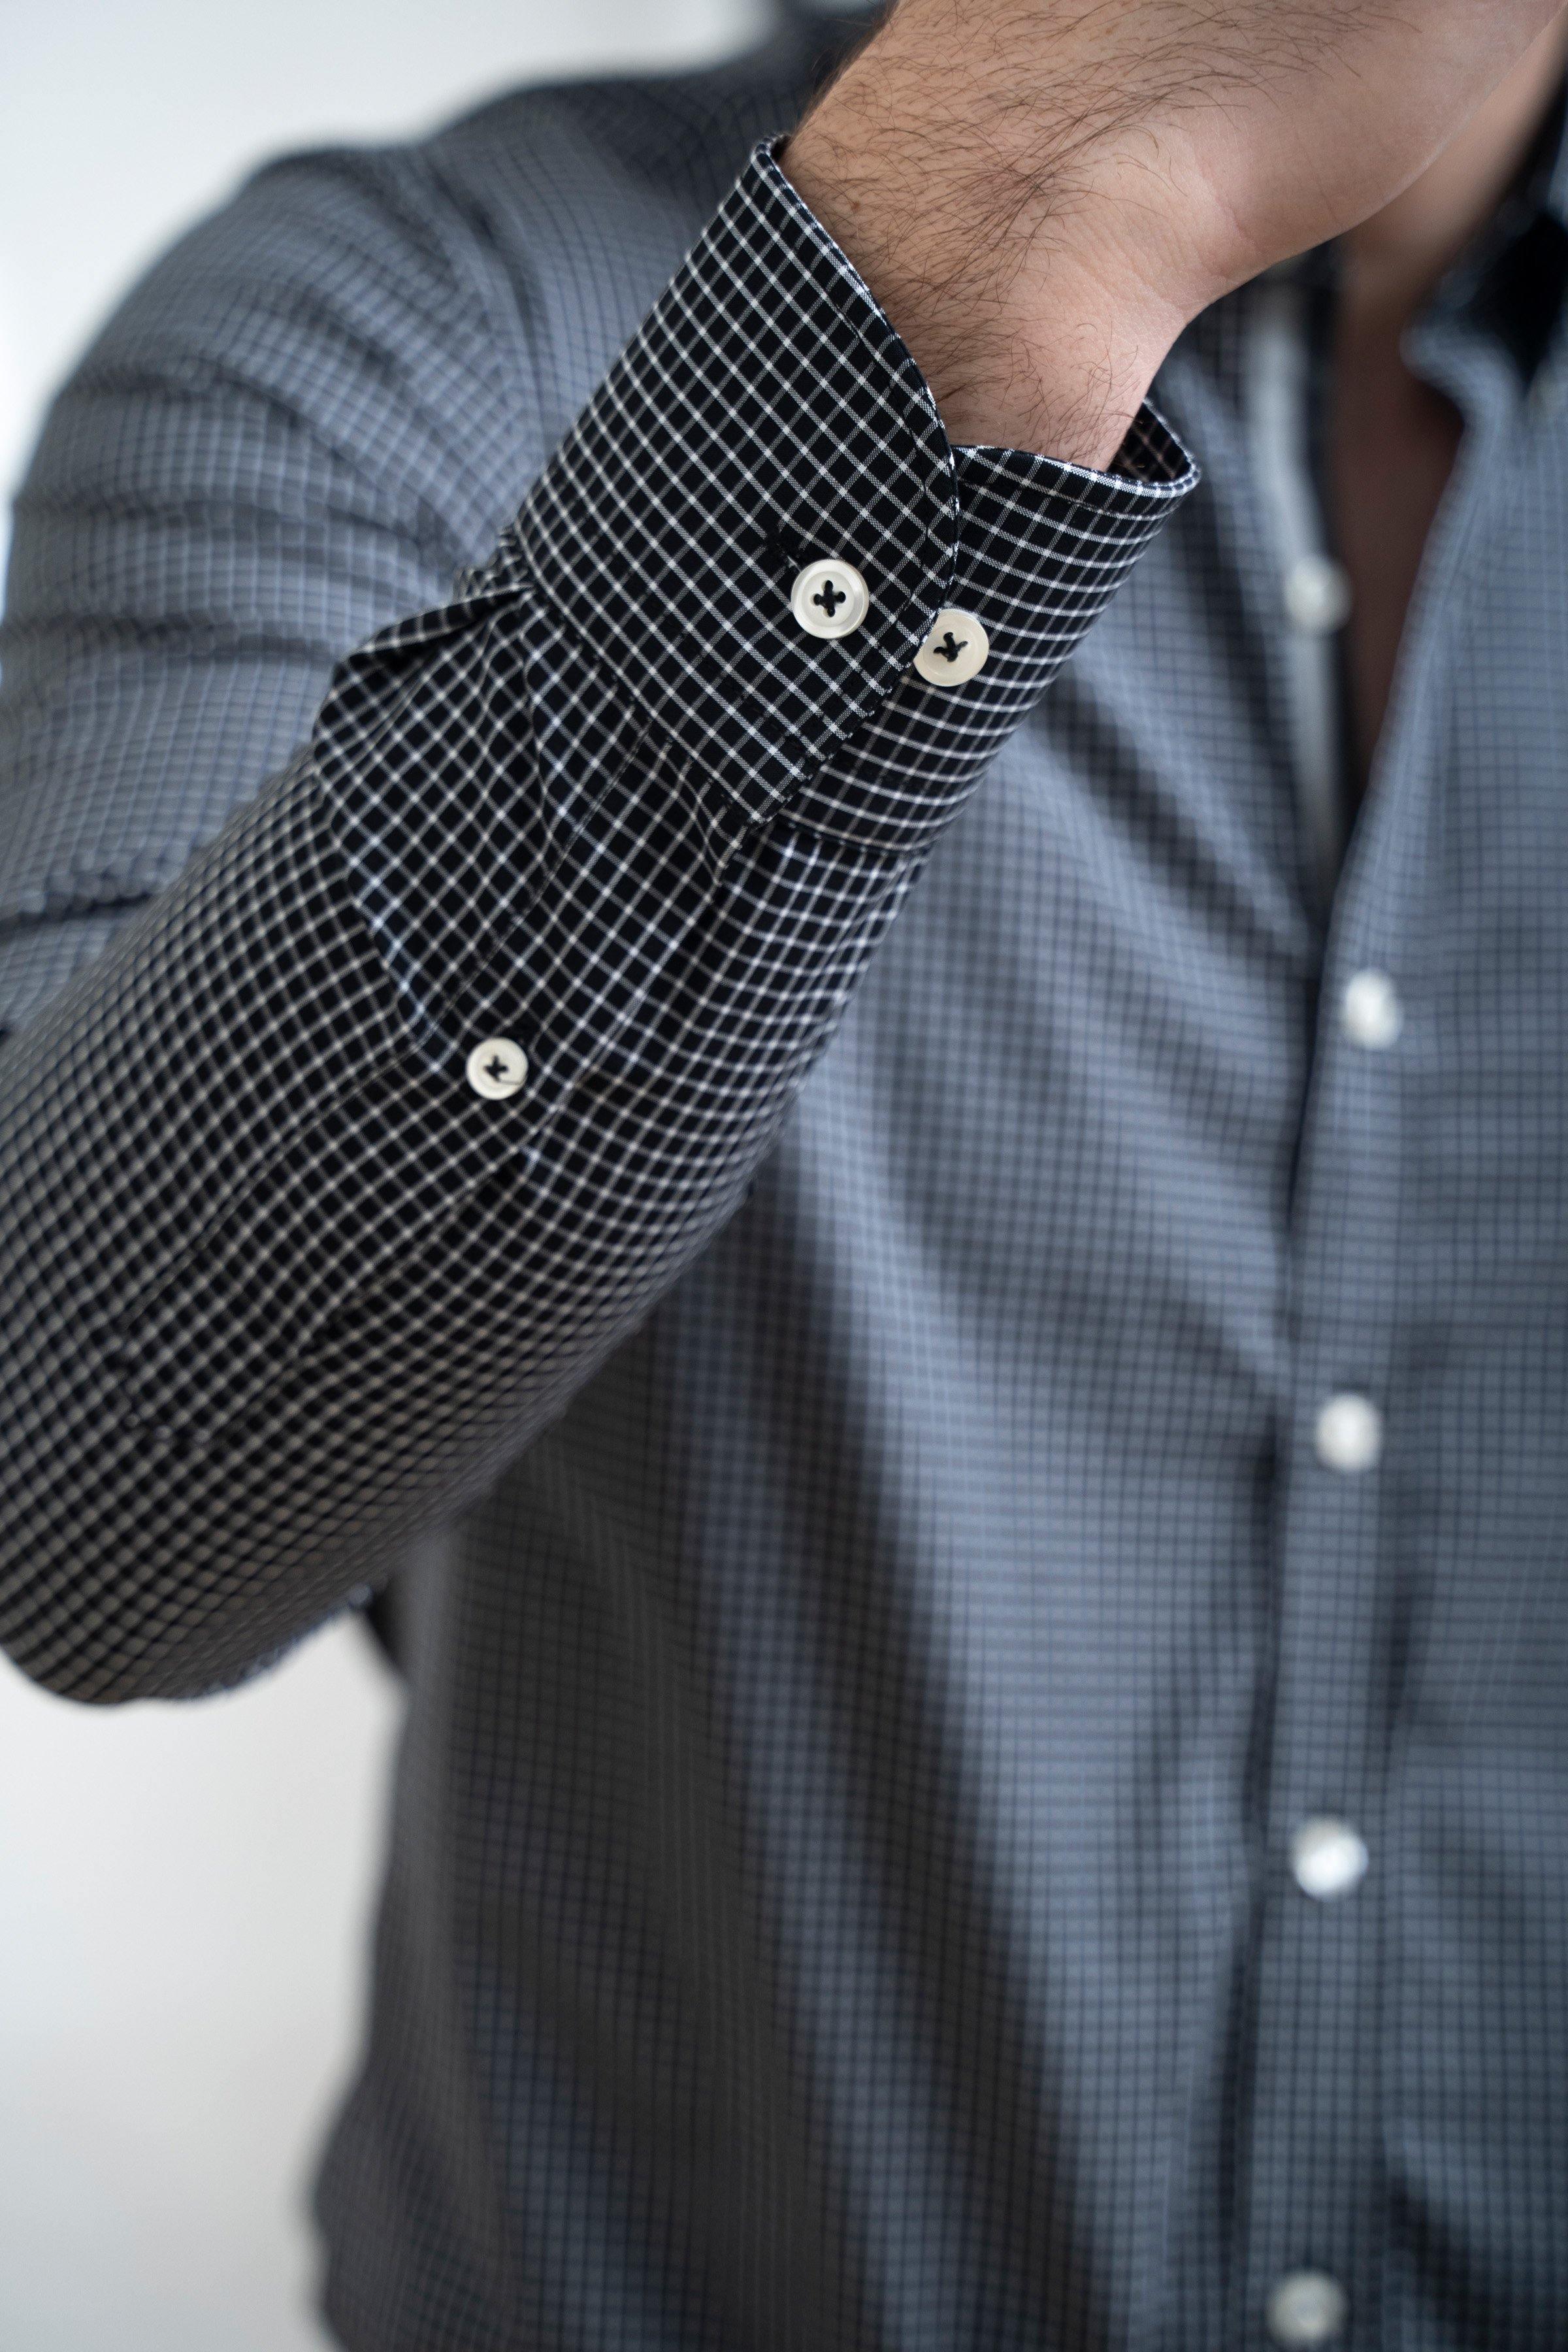 SEMI FORMAL SHIRT FULL SLEEVE BUTTON BLACK WHITE at Charcoal Clothing